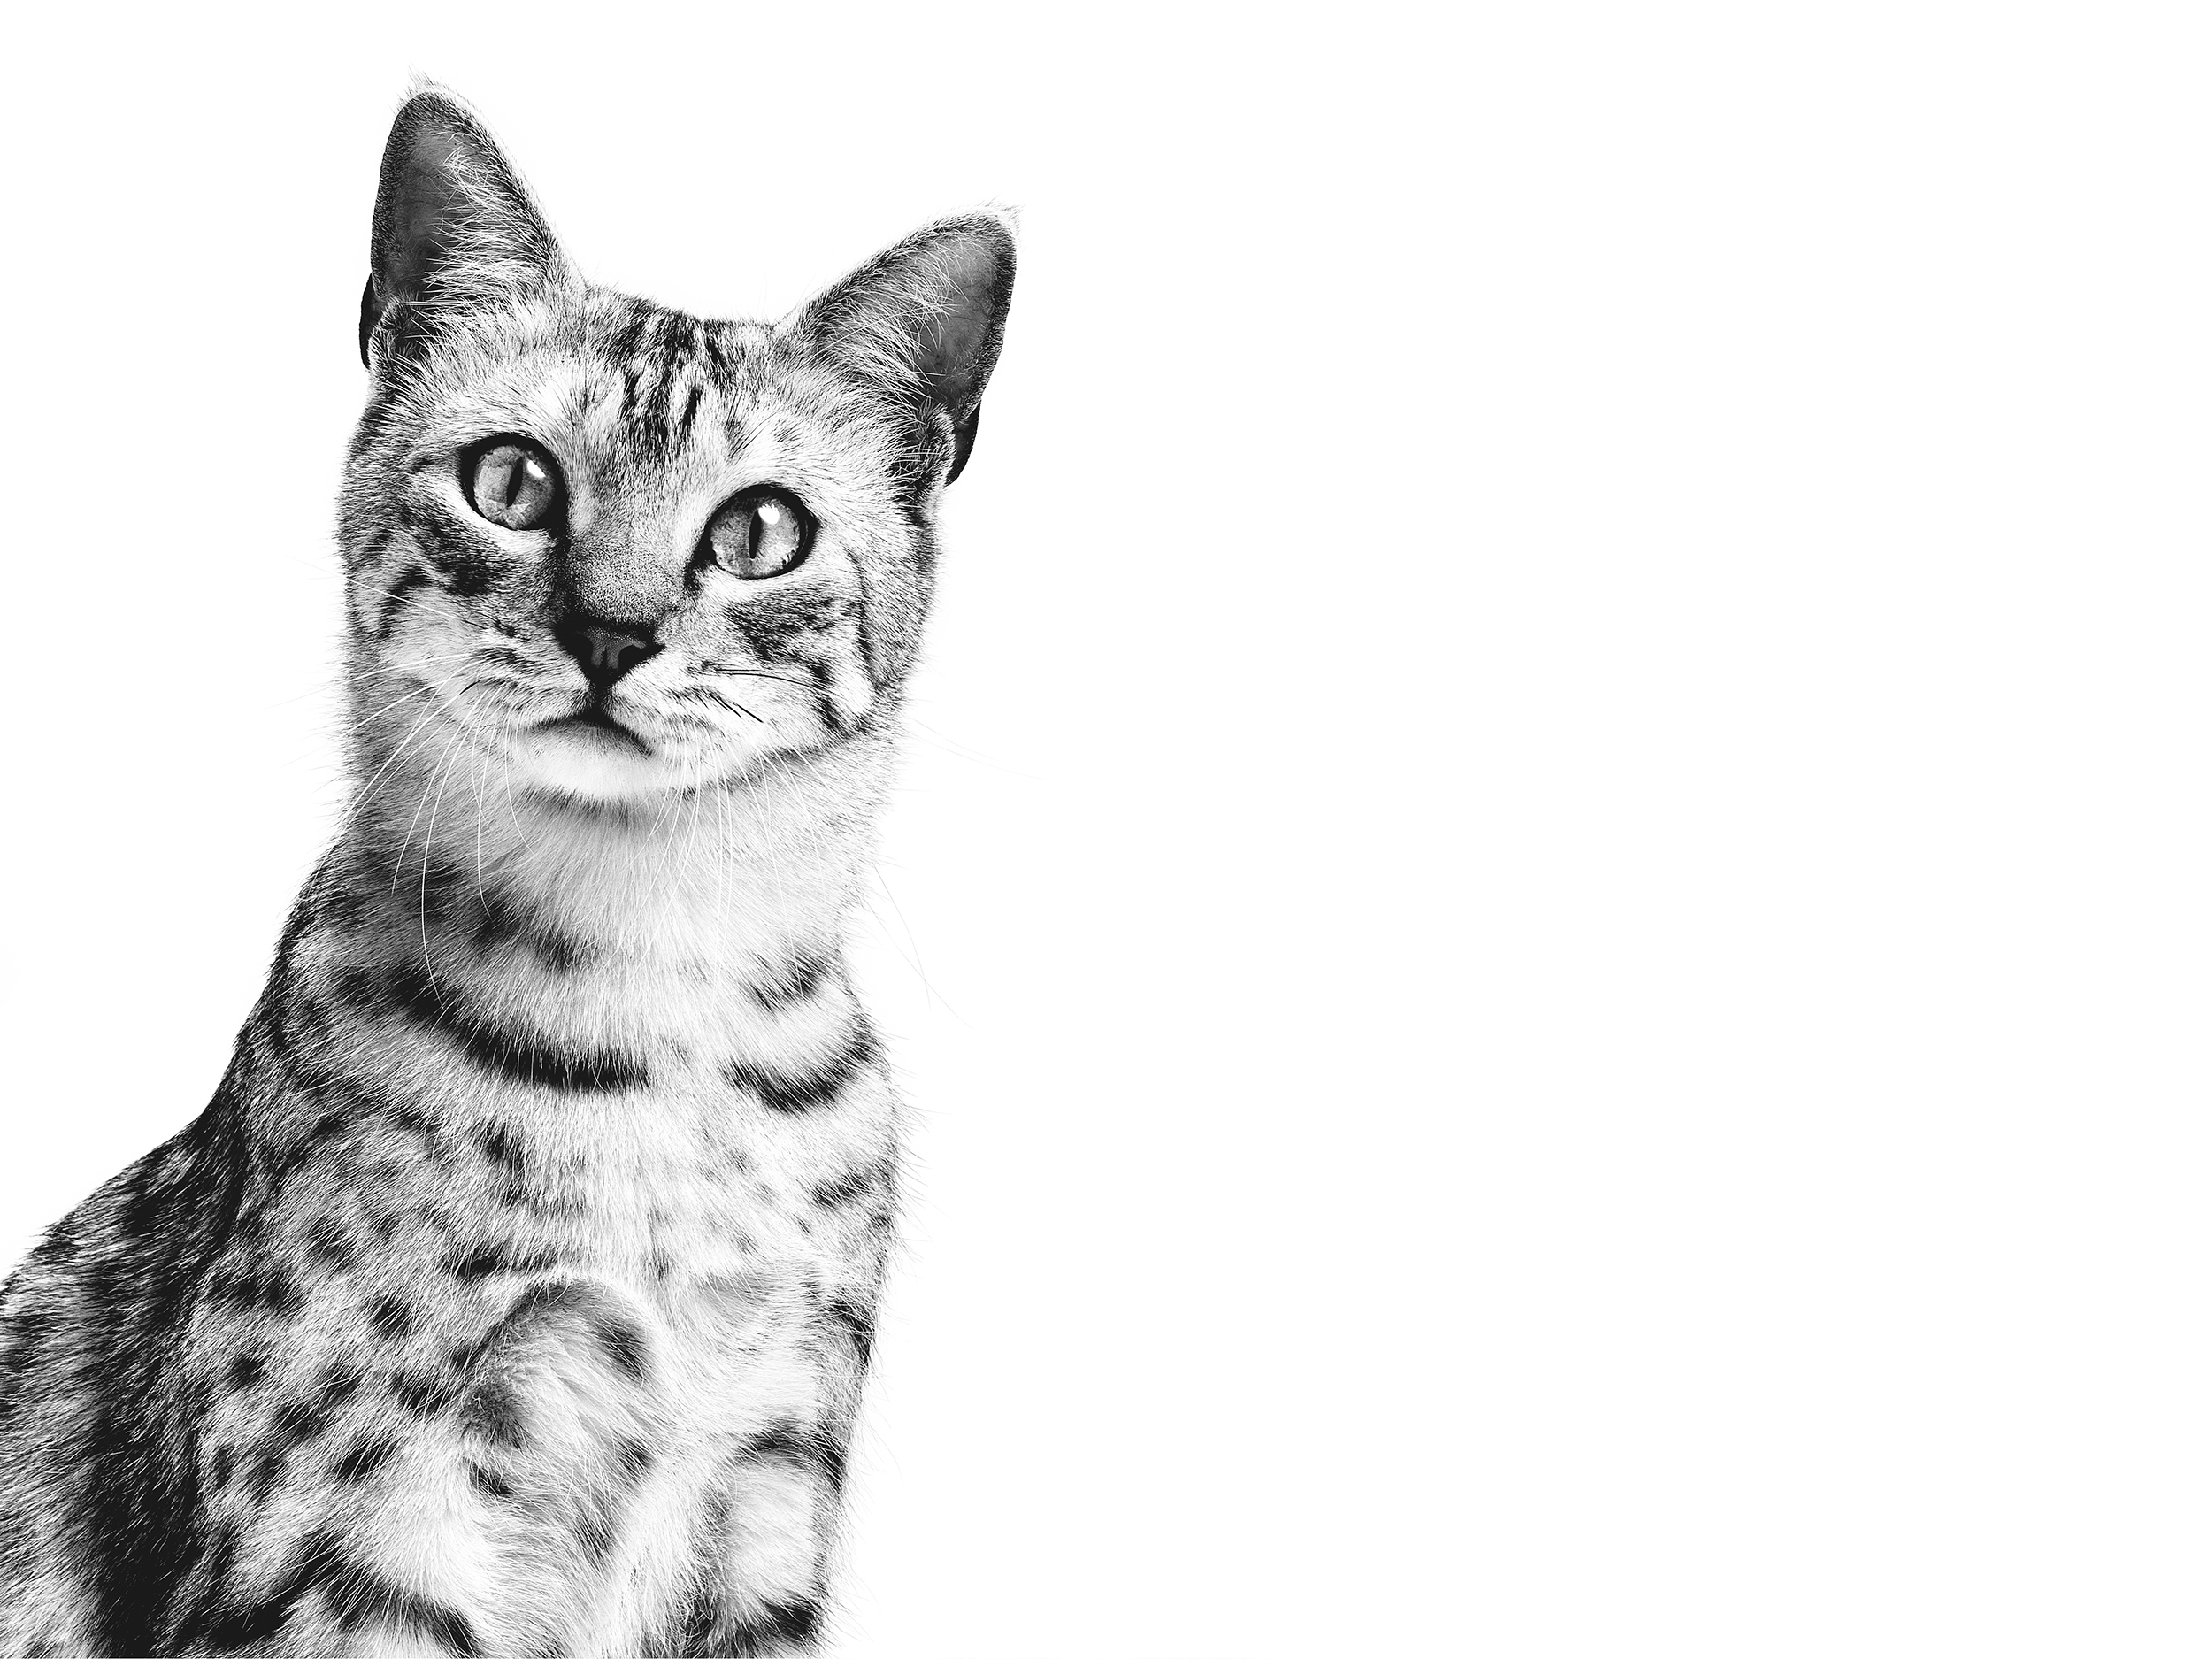 Egyptian Mau adult in black and white